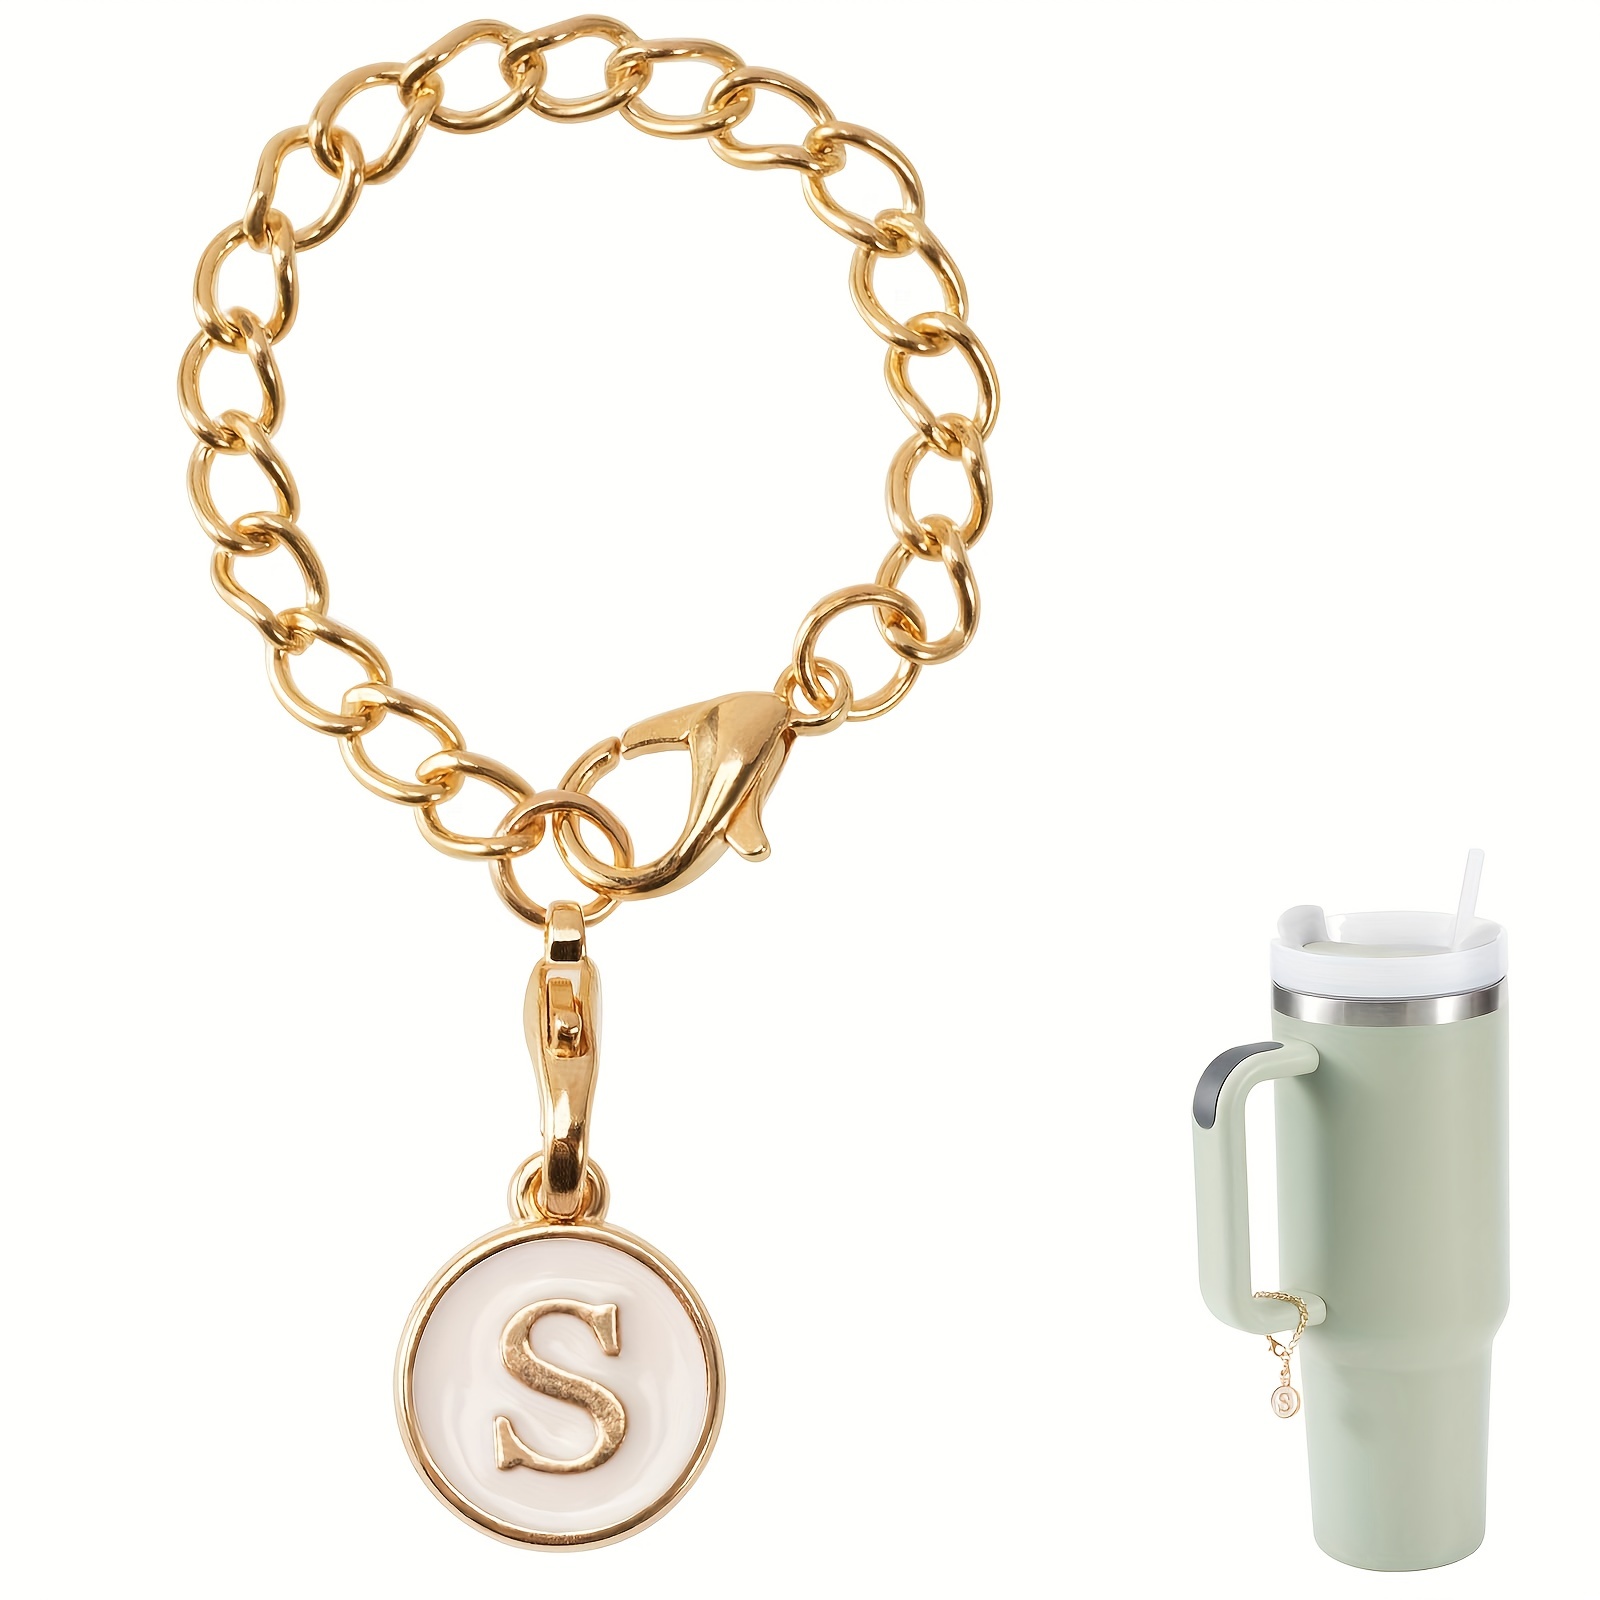 Stanley Tumbler Gold Initial Charm Accessories Pretty Stanley